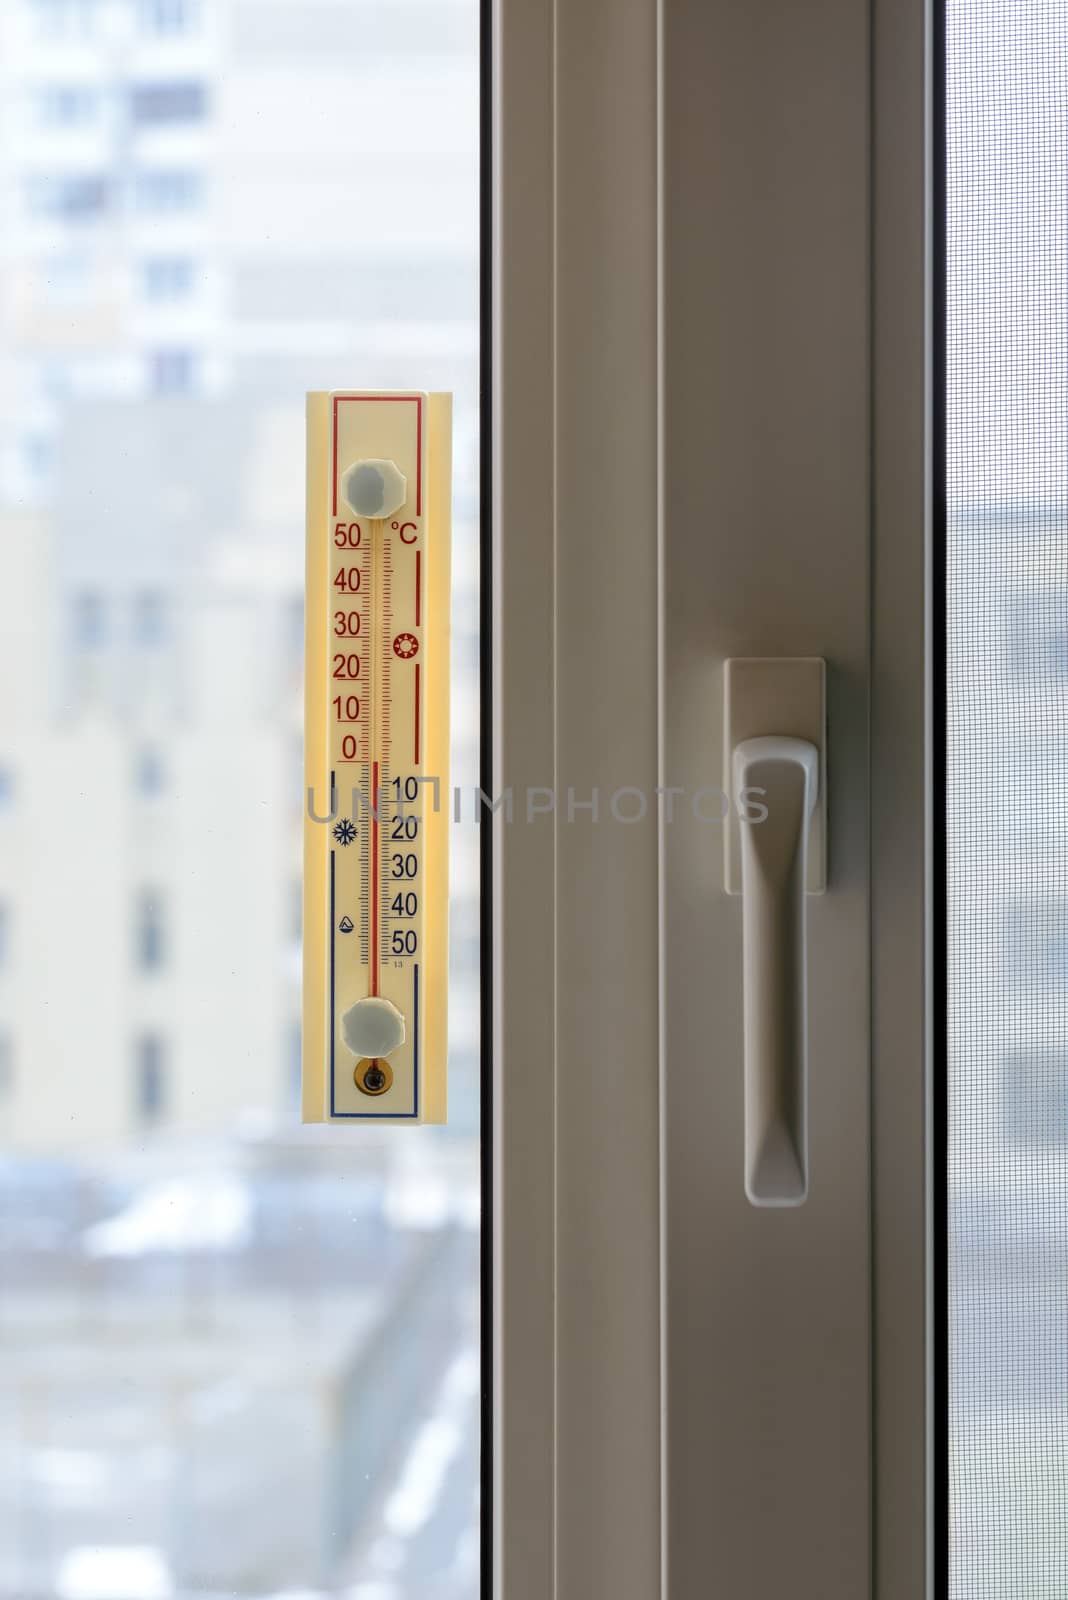 A thermometer, fixed out of the window, shows that it is zero degree celsius outdoor, while it is warm inside the room